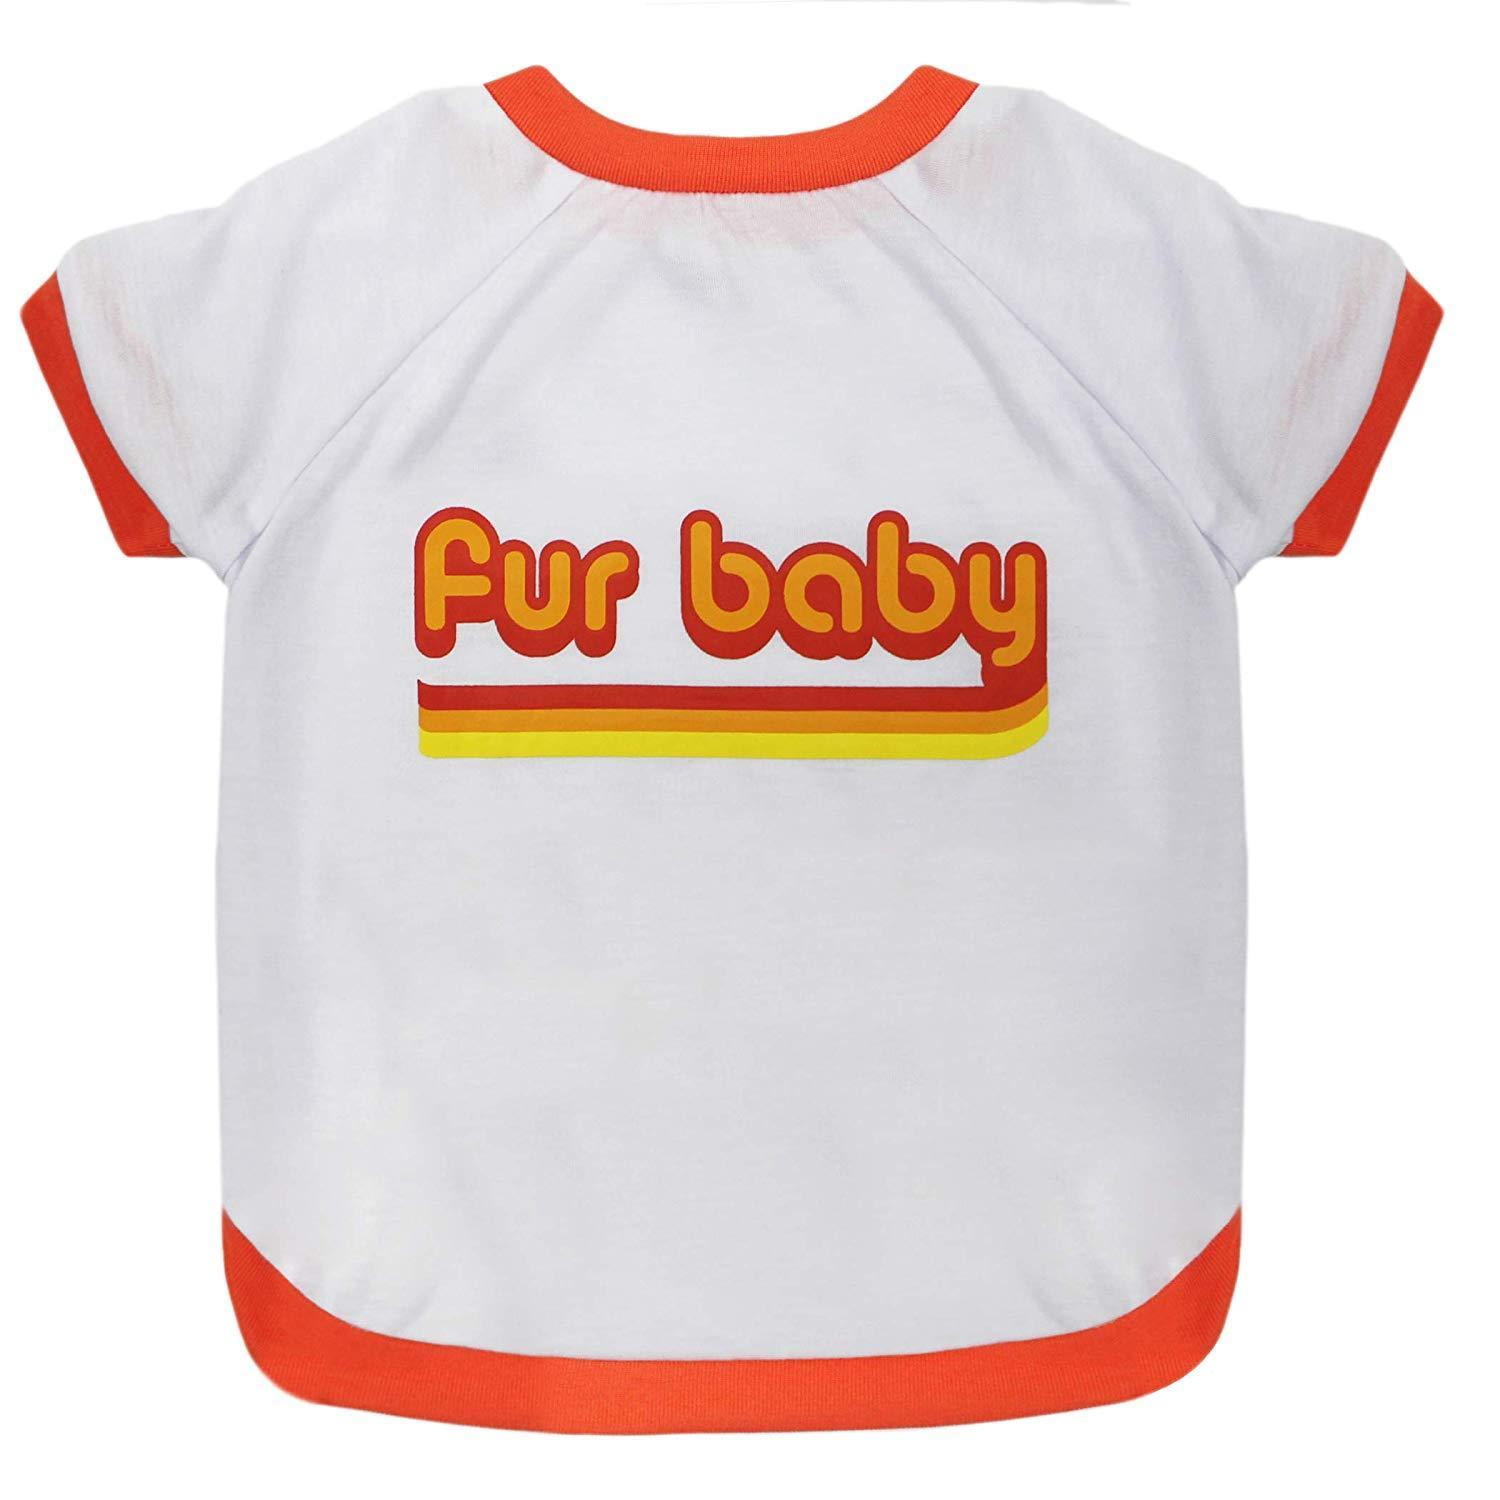 Small Cutest Pet Tee Shirt for the real sporty pup CHICAGO BEARS Dog T-Shirt 